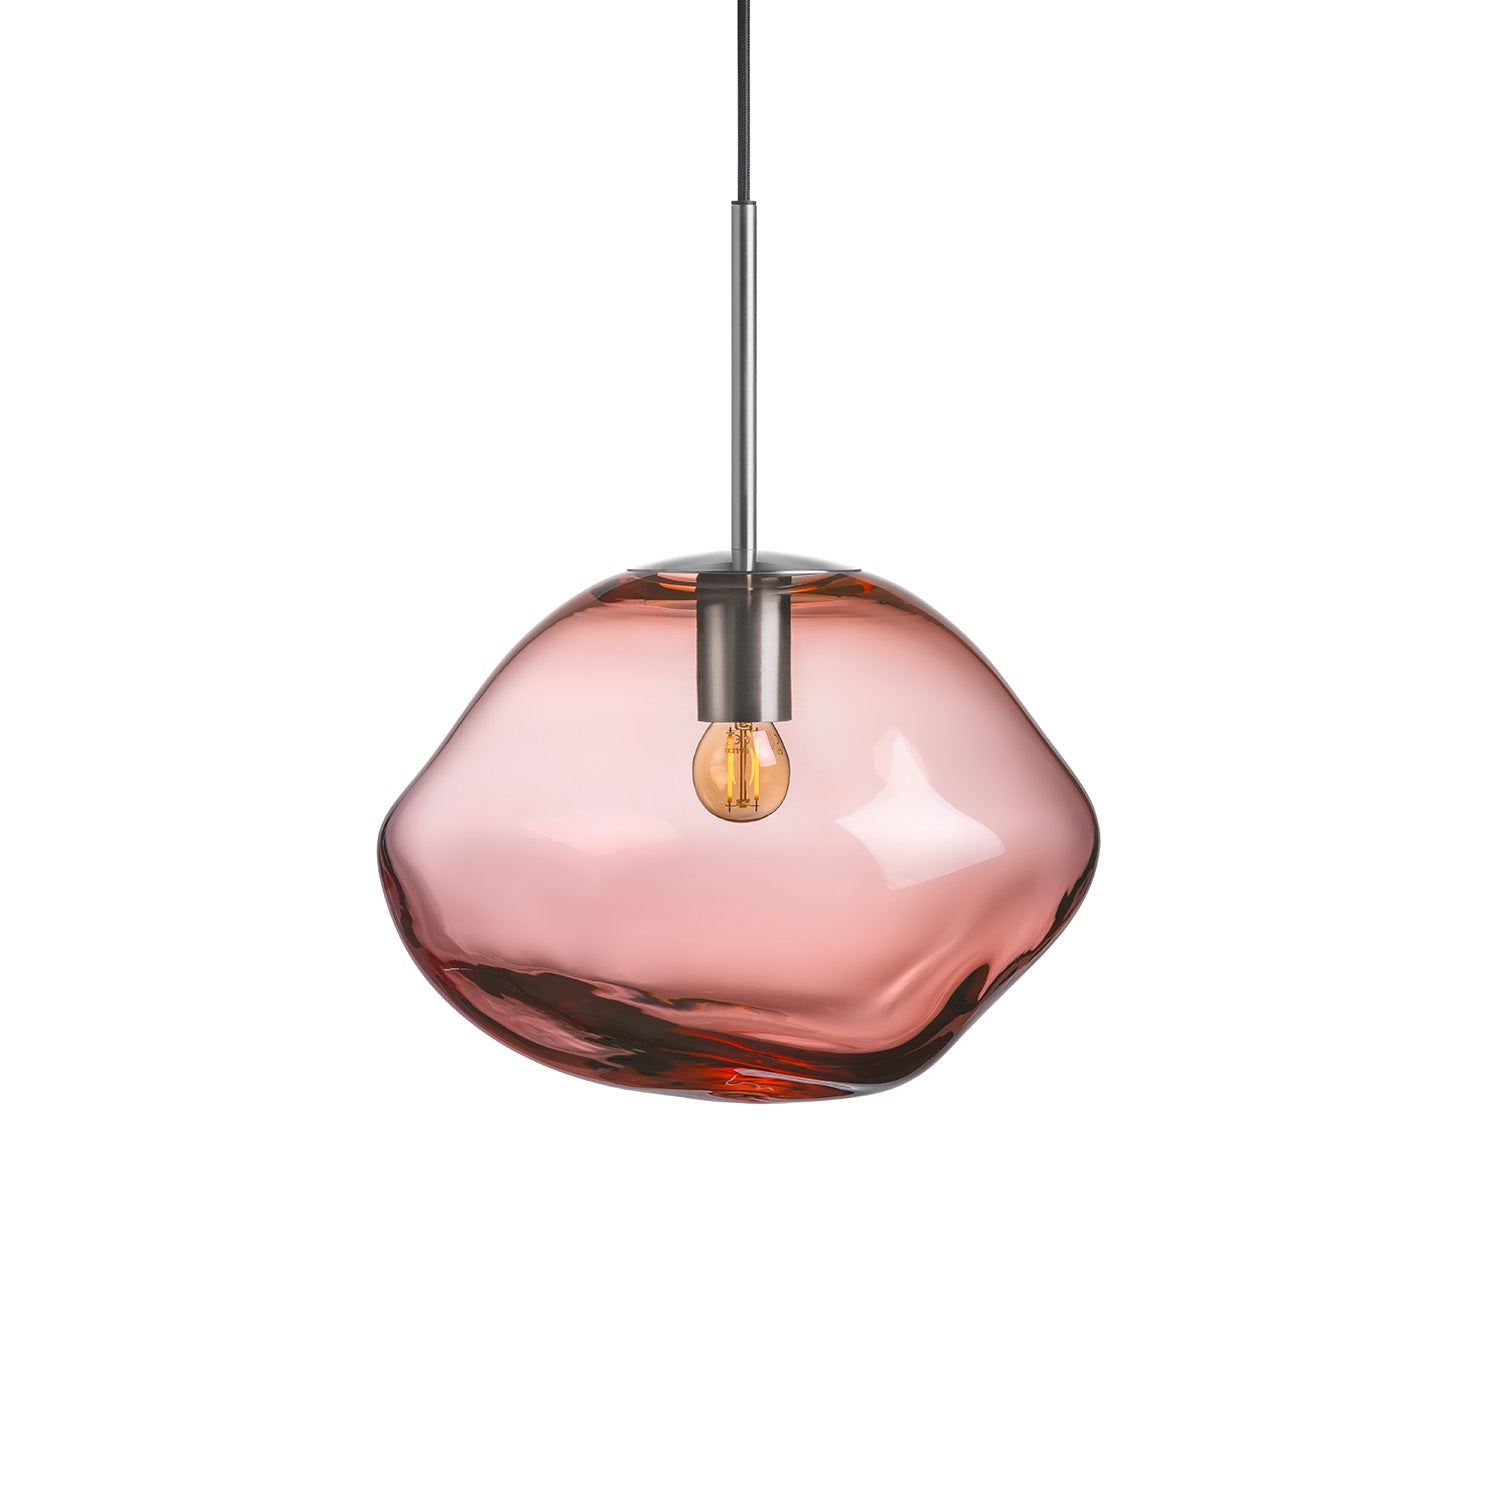 CRYSTAL STONE - Distorted and asymmetrical blown glass pendant lamp